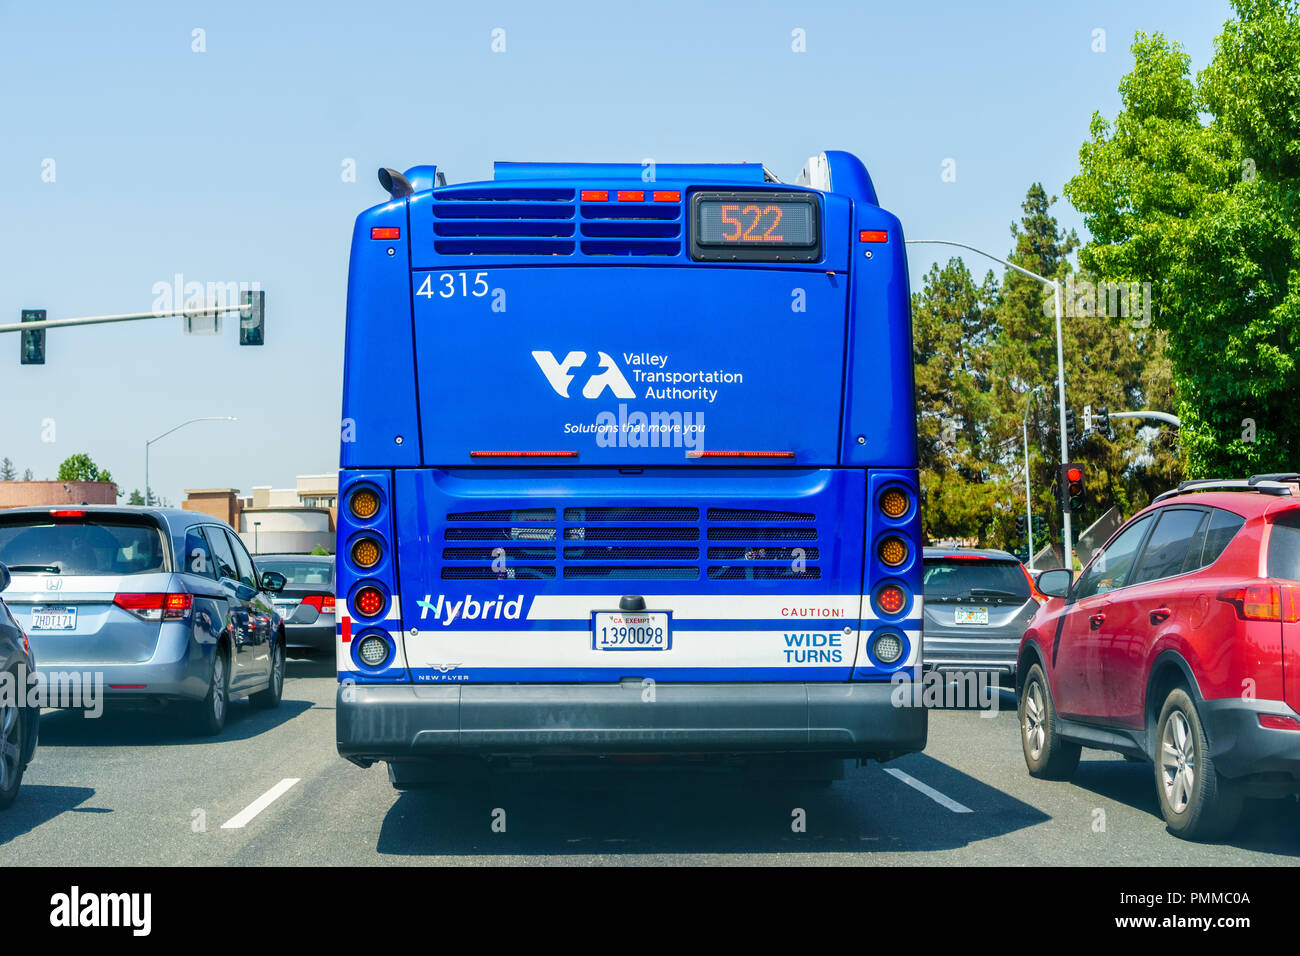 August 13, 2018 Sunnyvale / CA / USA - VTA (Santa Clara Valley Transport Authority) Bus driving on a street in south San Francisco bay area Stock Photo